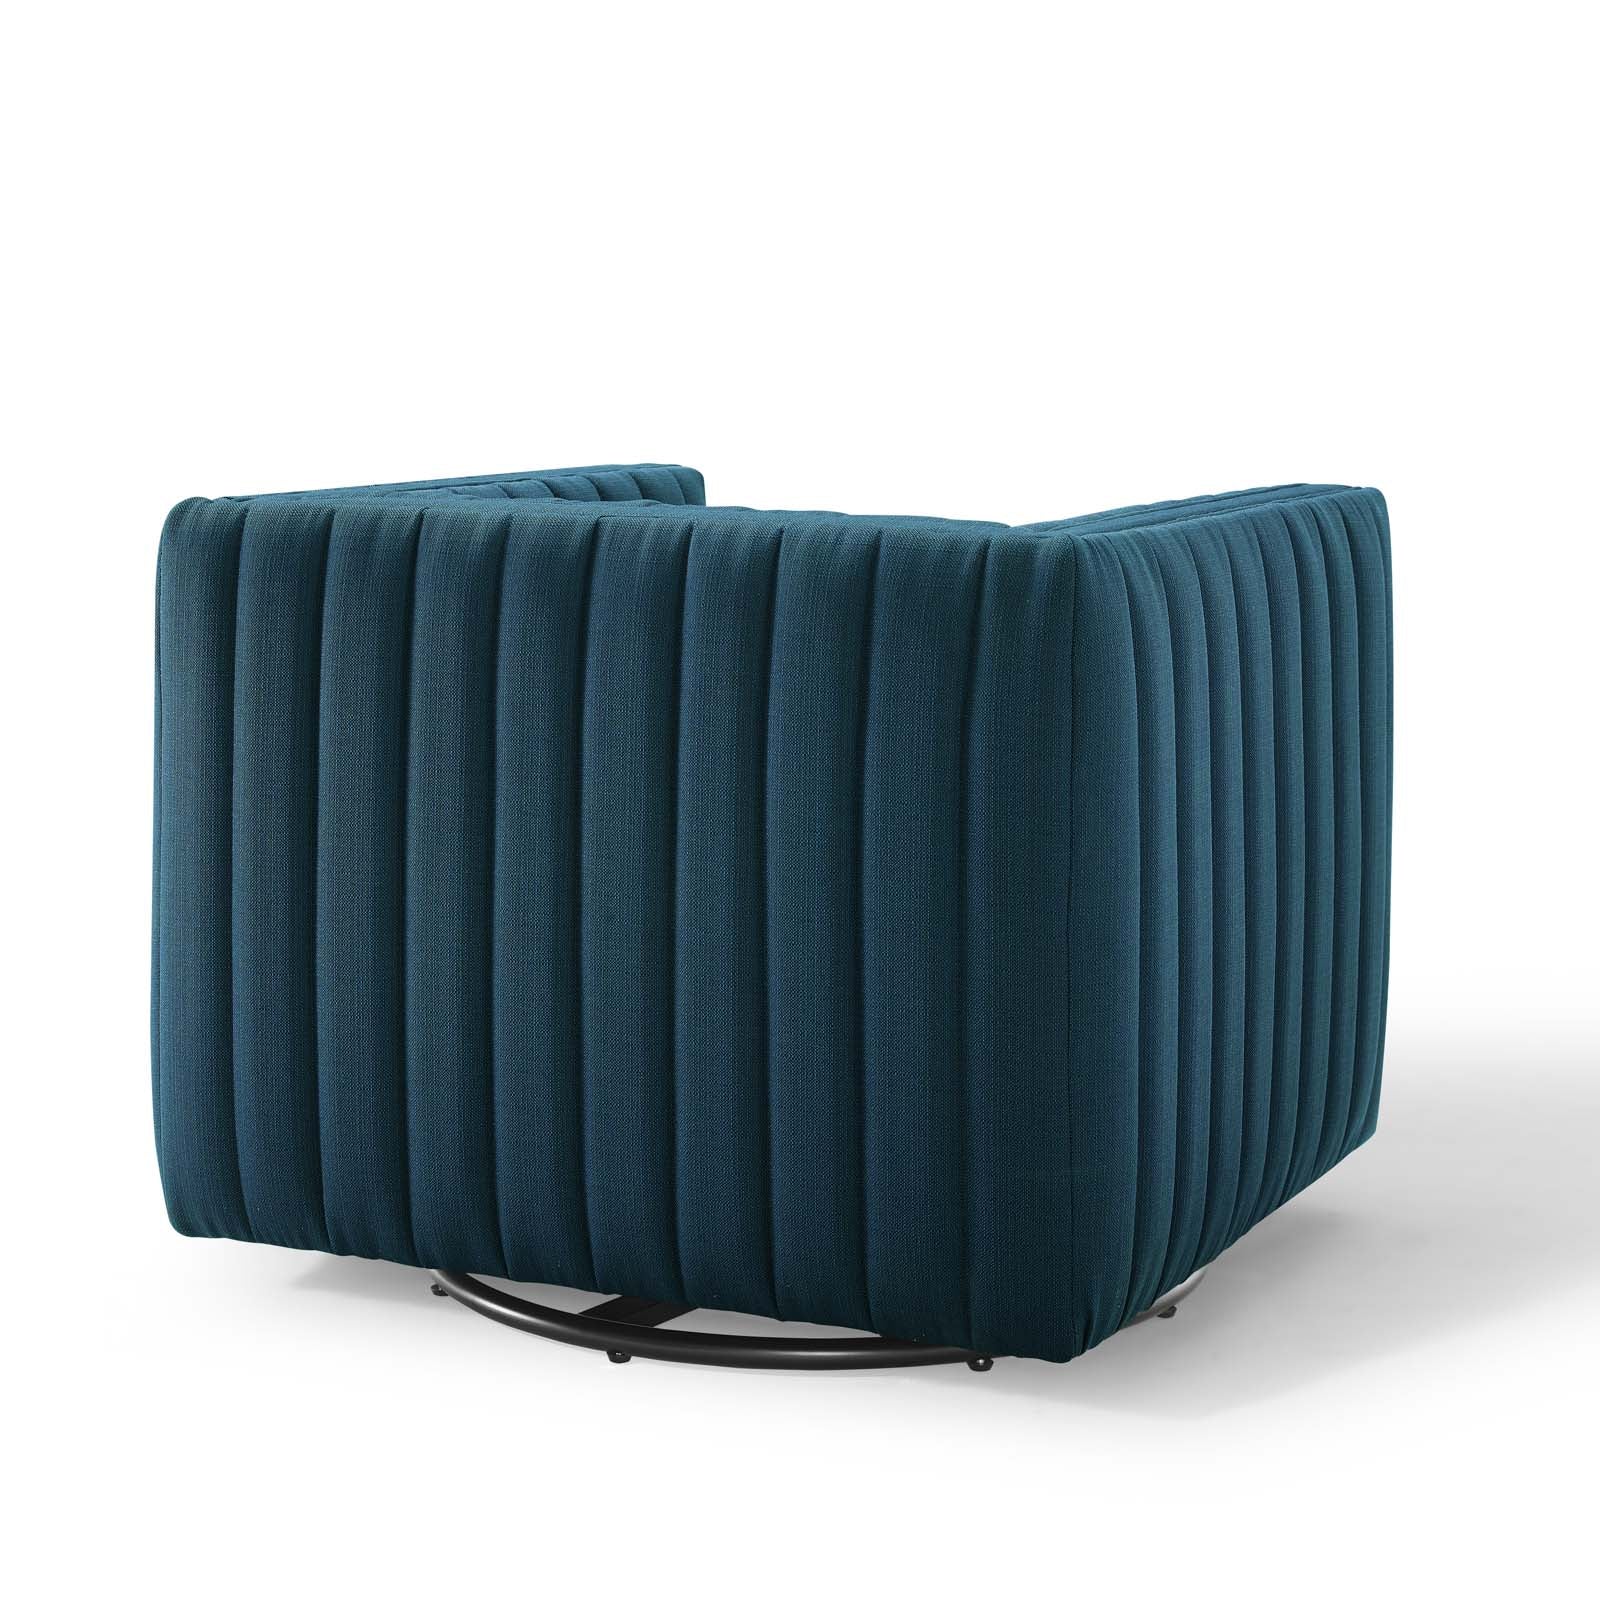 Modway Accent Chairs - Conjure Tufted Swivel Upholstered Armchair Azure